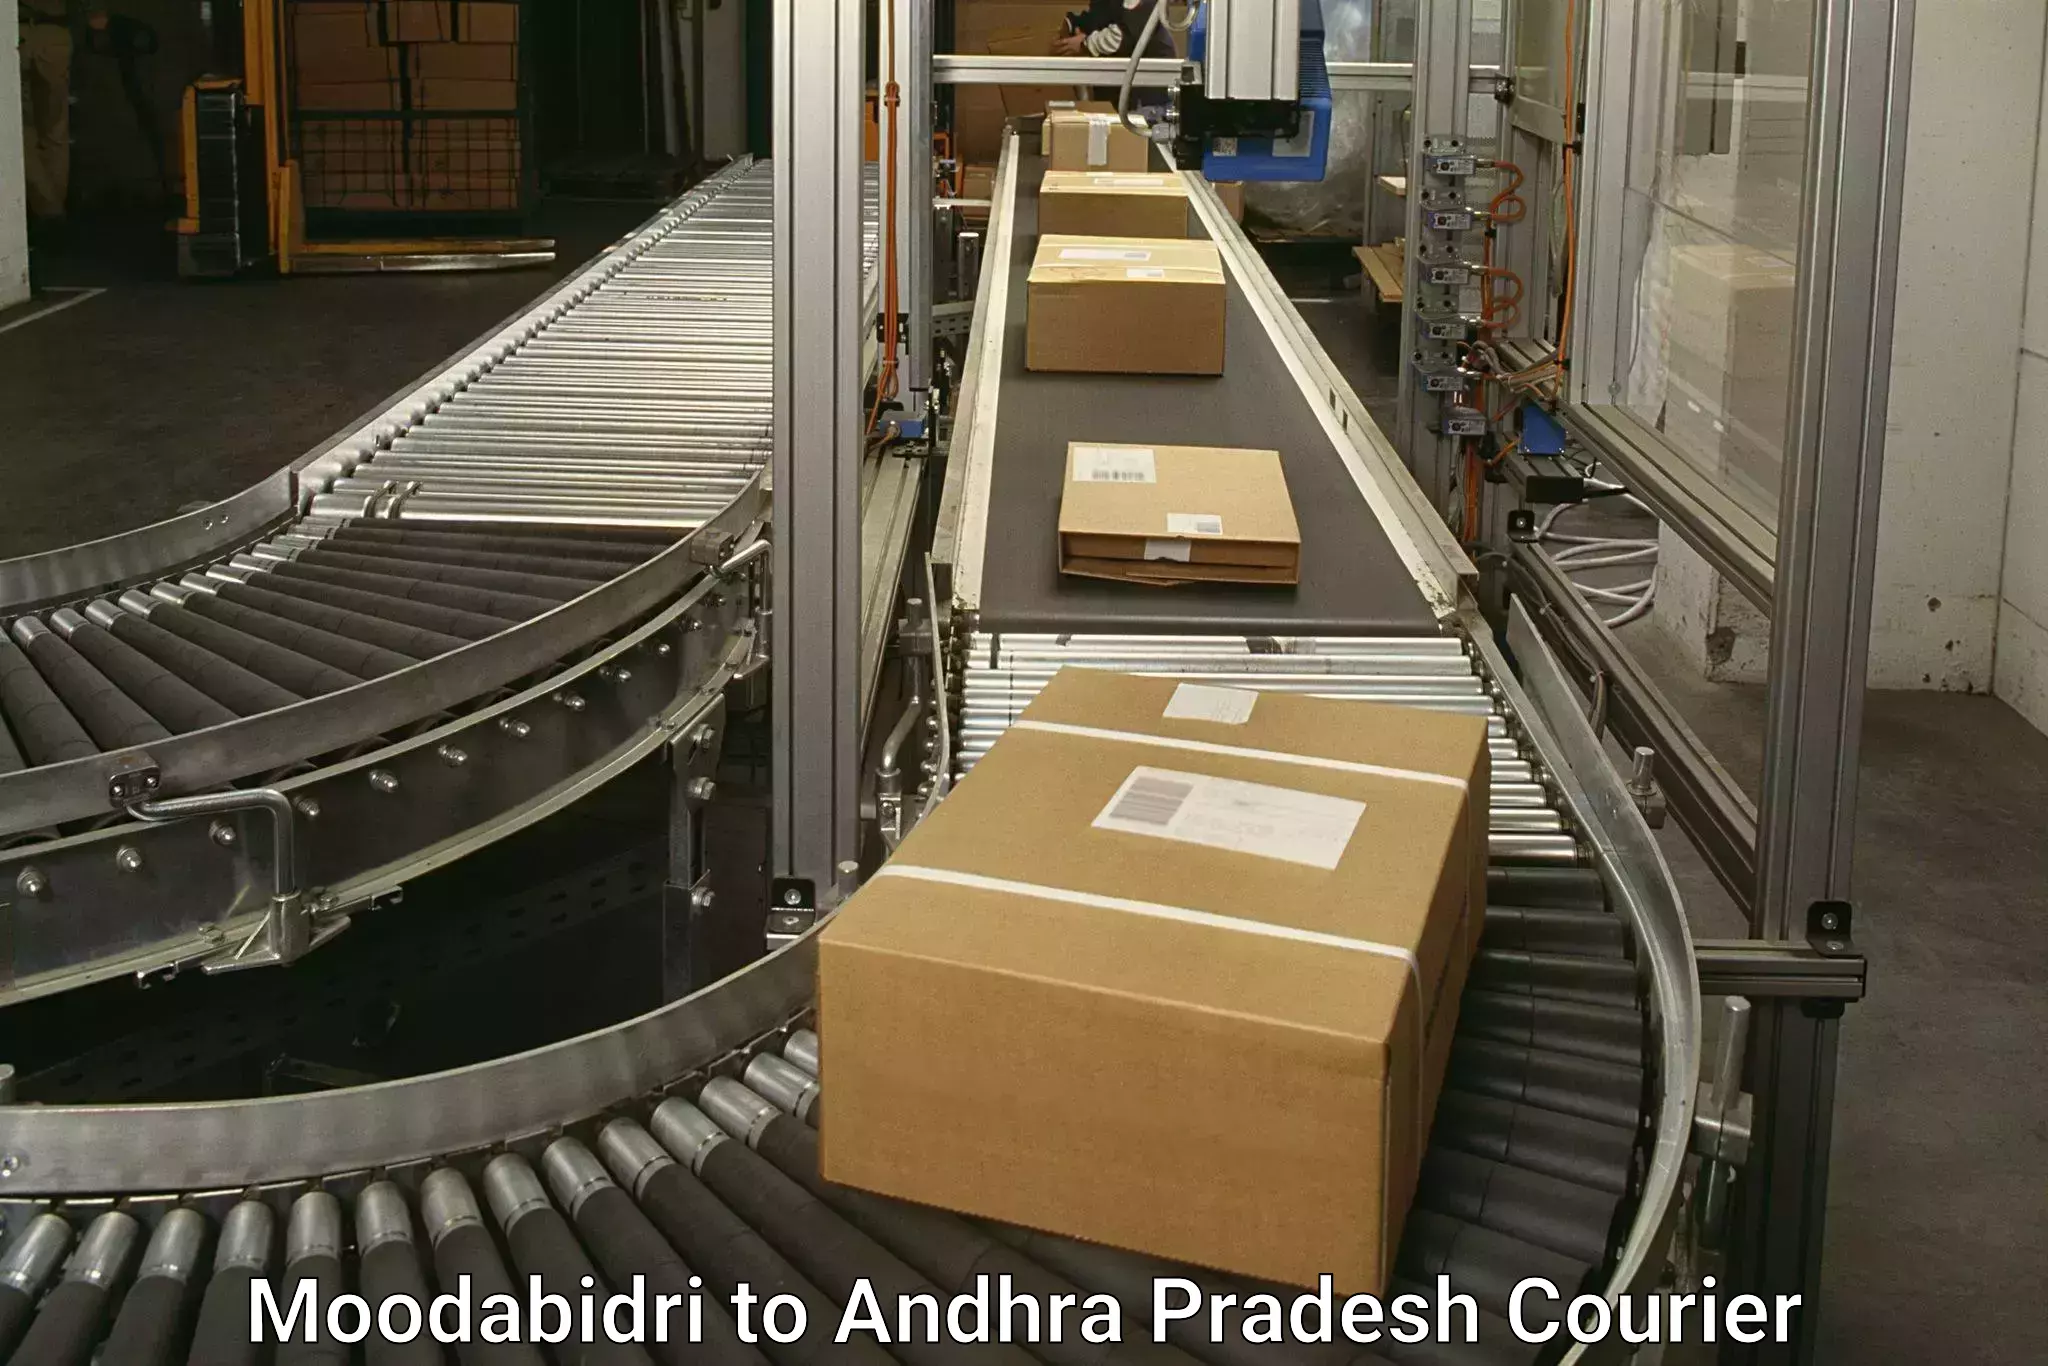 Express delivery solutions Moodabidri to Kothapalli